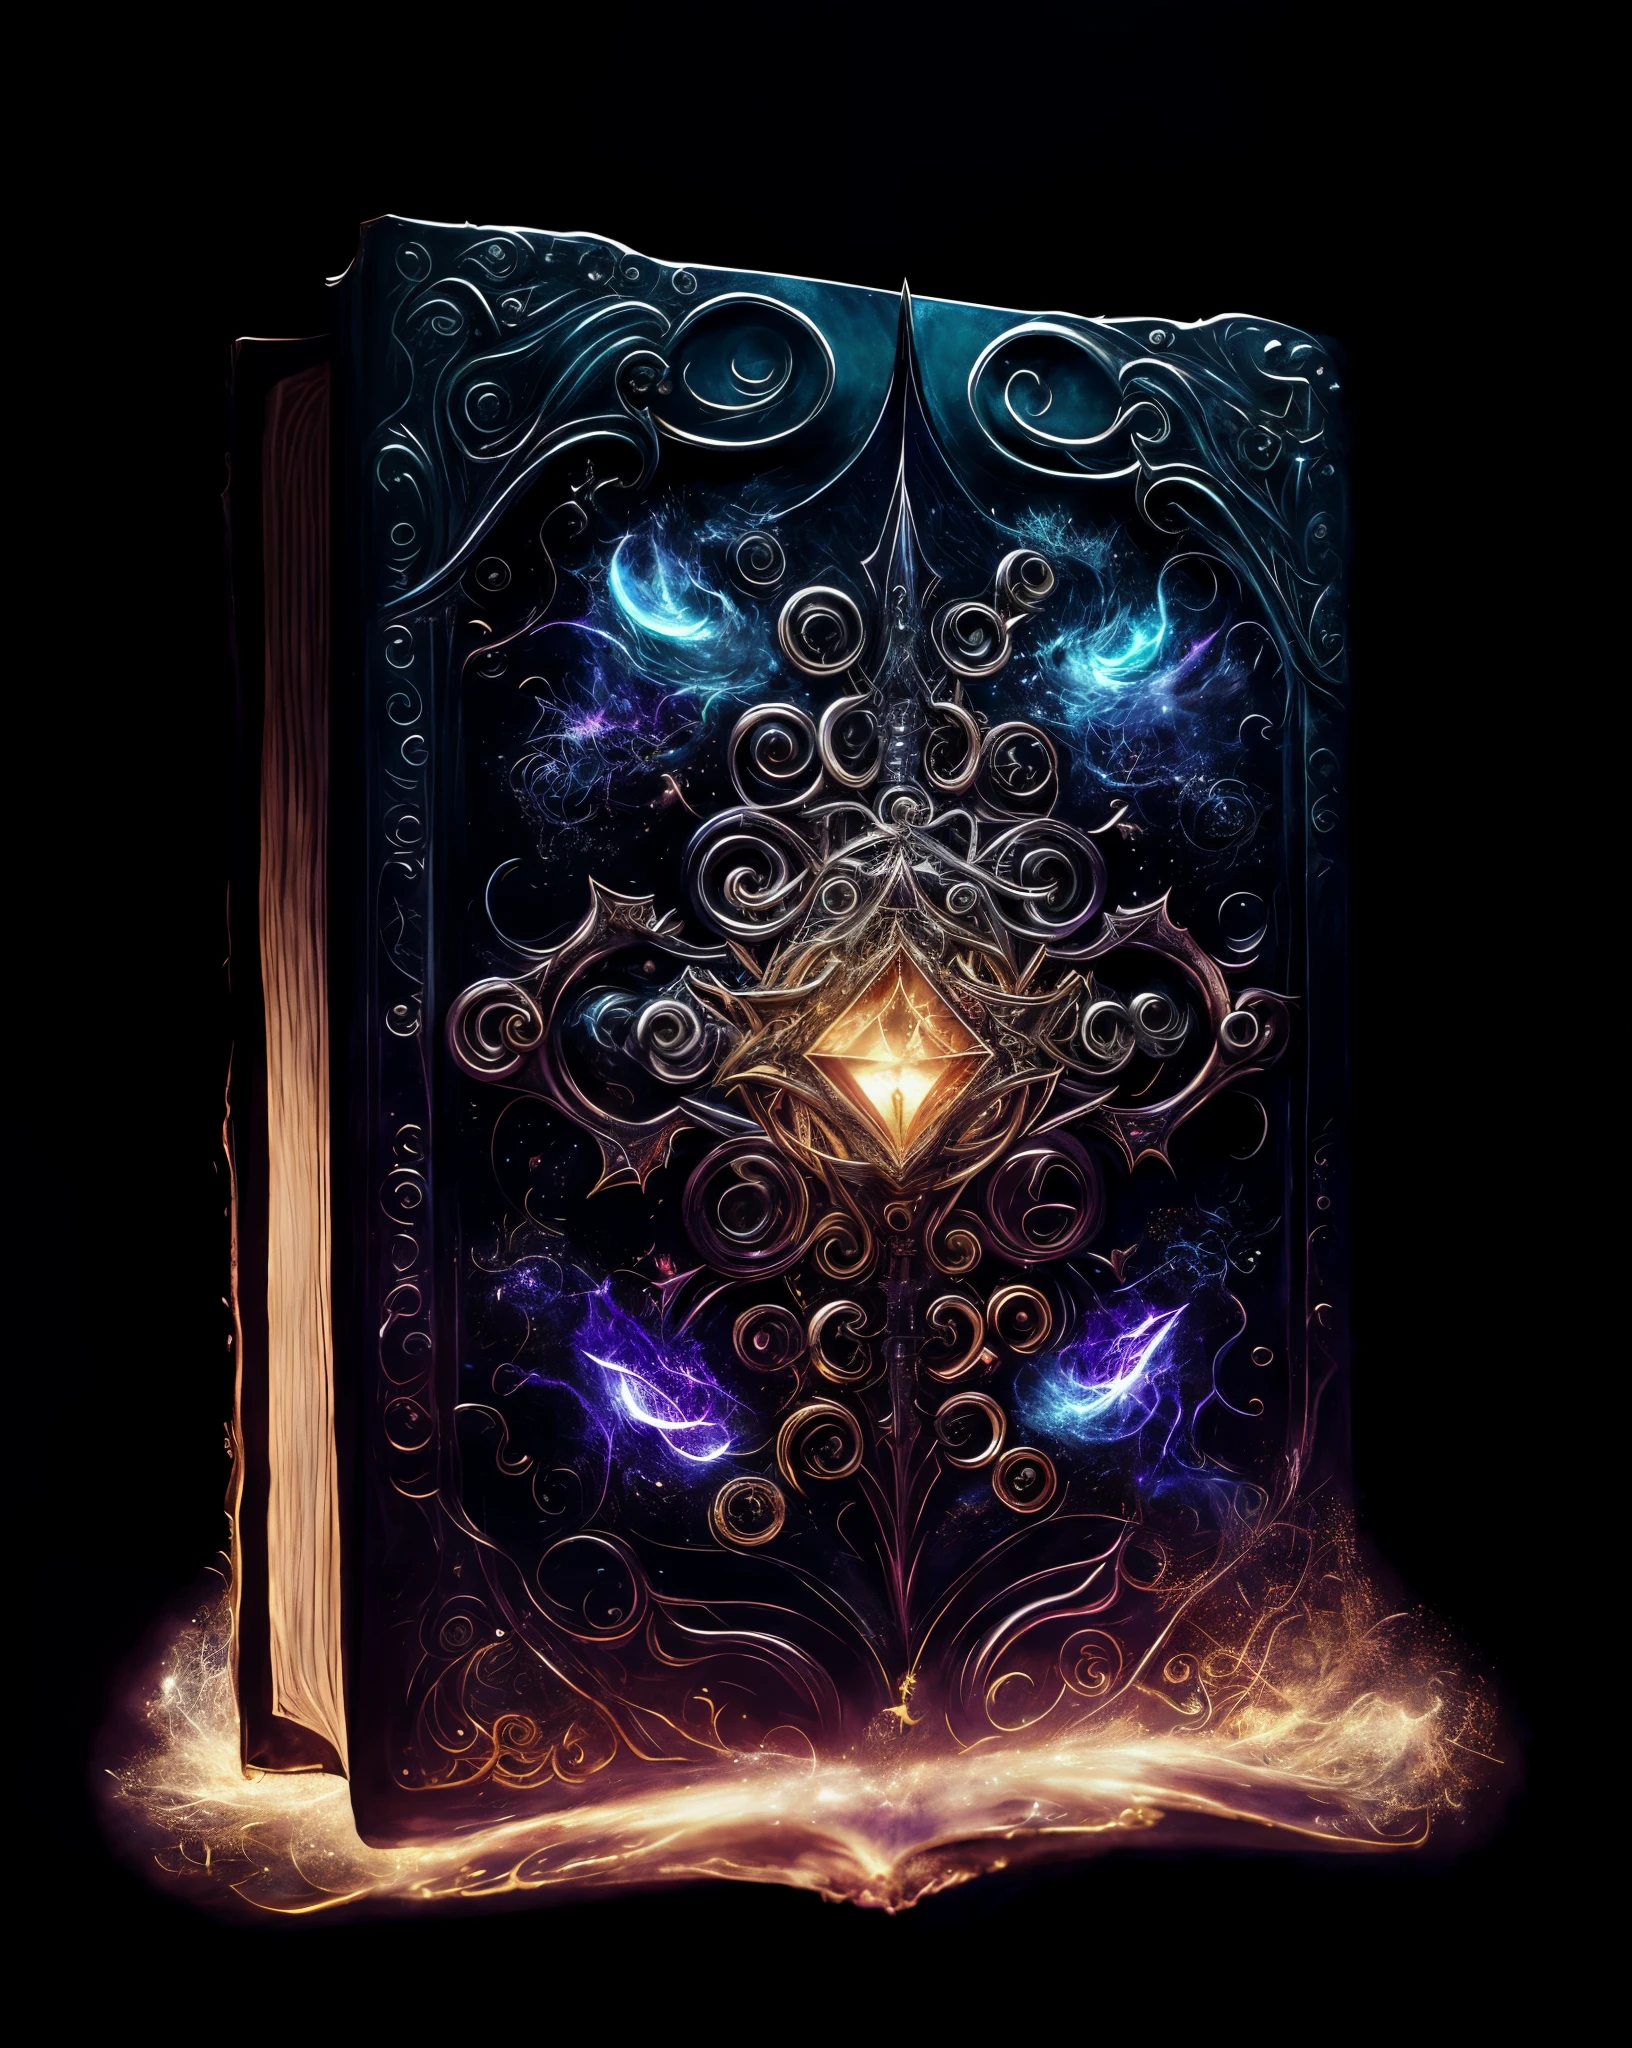 a close up of a book with a design on it, magic book, fantasy book illustration, fantasy book, fantasy book cover, spell book, floating spellbook, fantasy rpg book illustration, grimoire, old artbook, lost grimoire, fantasy game spell symbol, fantasy art behance, highly detailed fantasy art, 8k hd wallpaperjpeg artifact